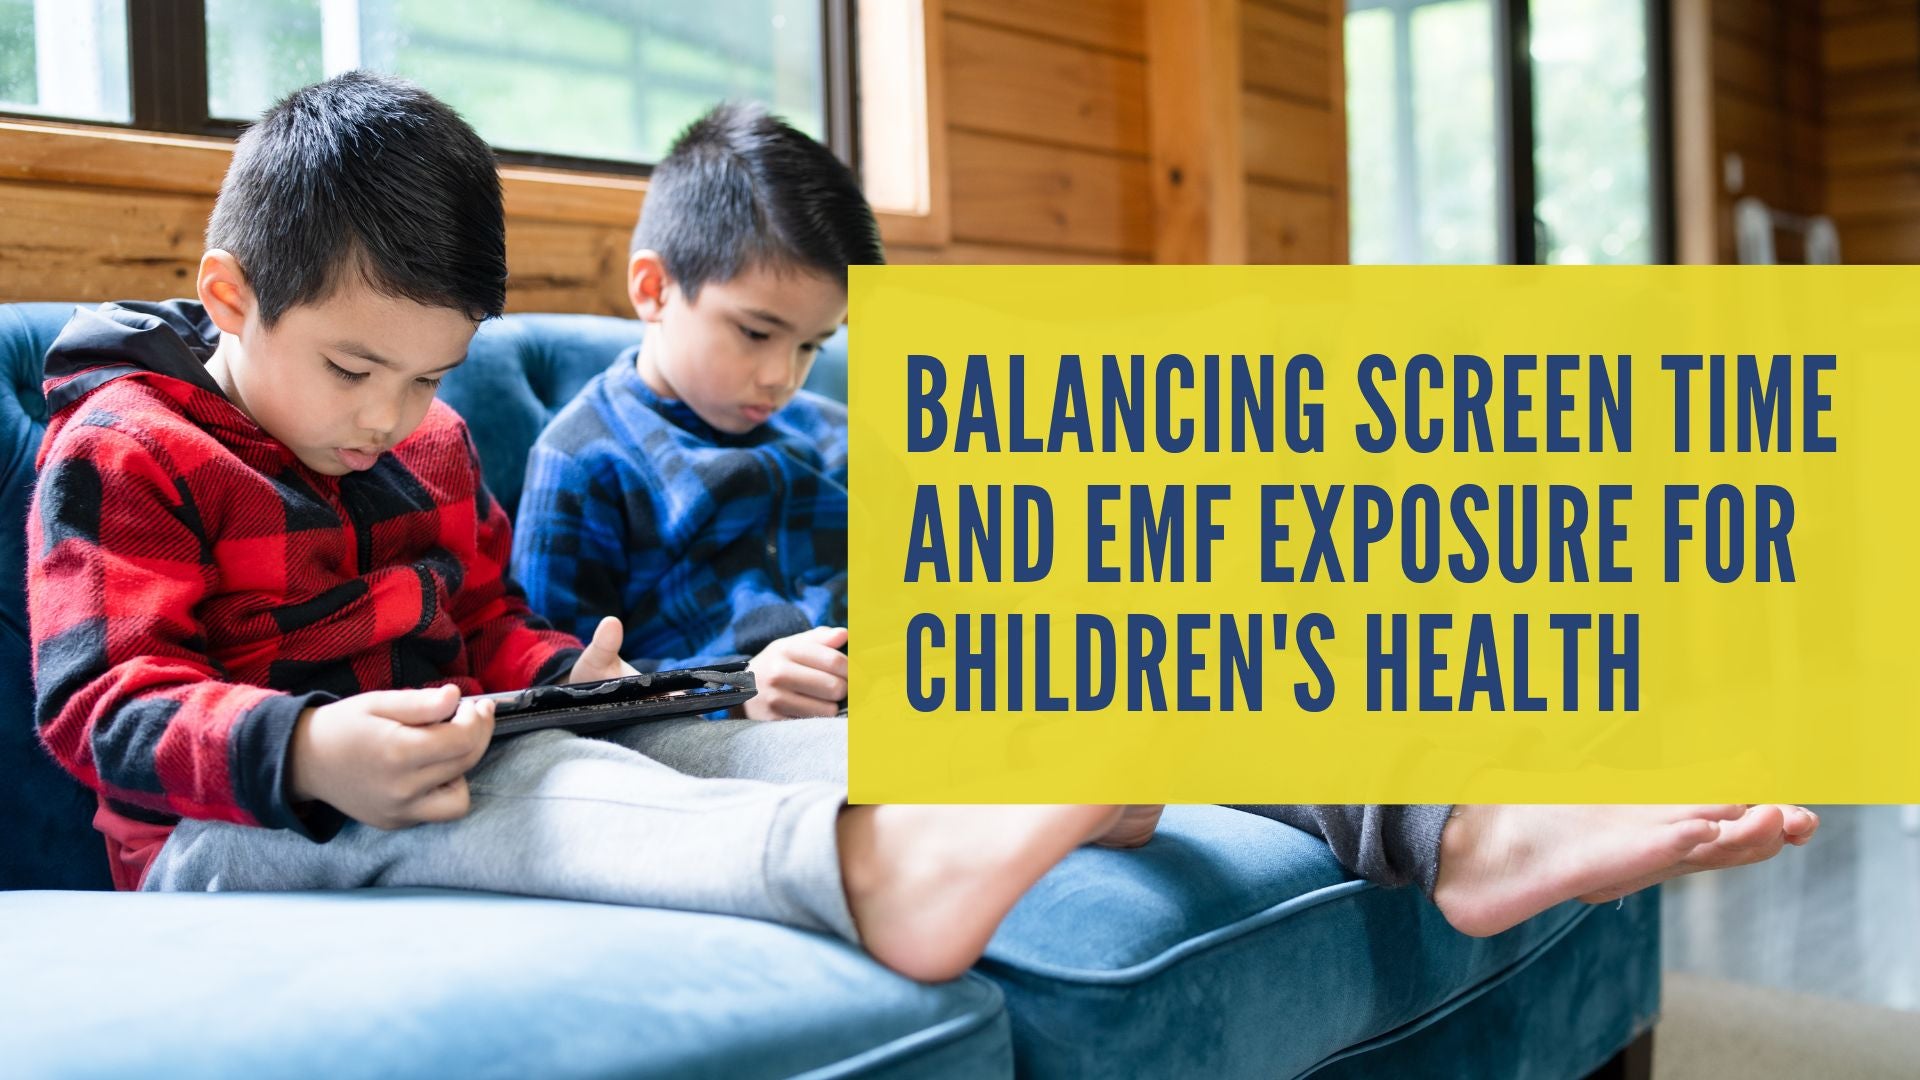 Balancing Screen Time and EMF Exposure for Children's Health